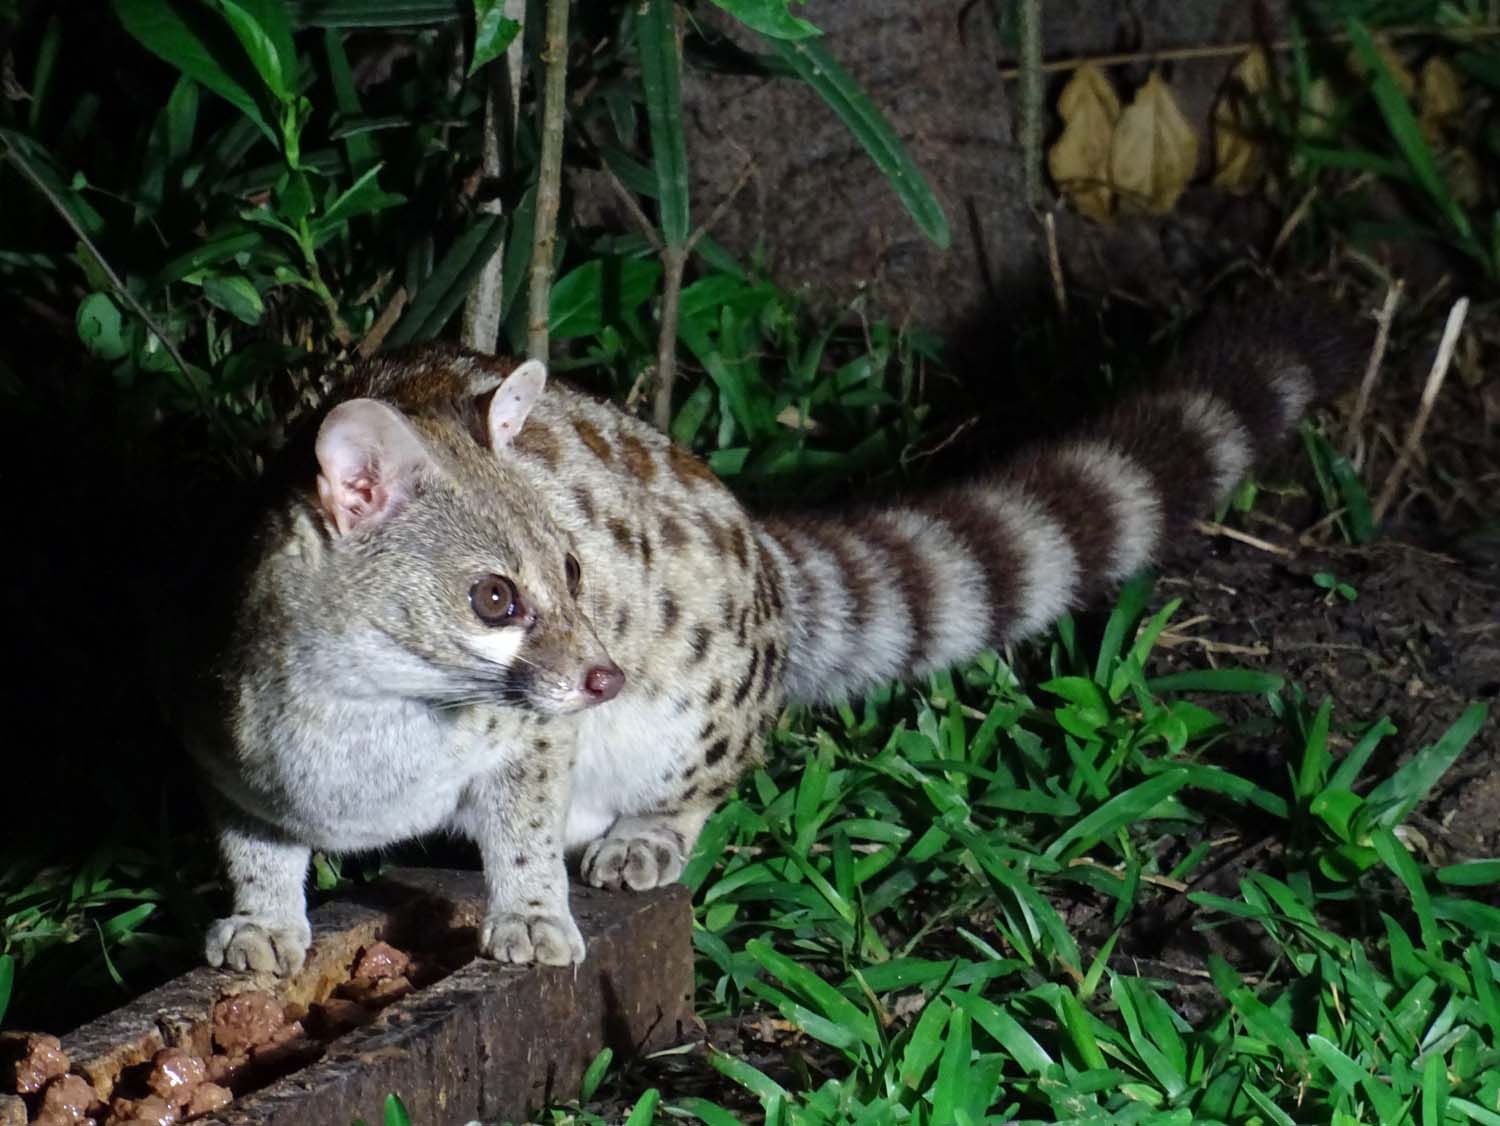 a genet comes for a visit (and eat some of the Whiskas put out for him)